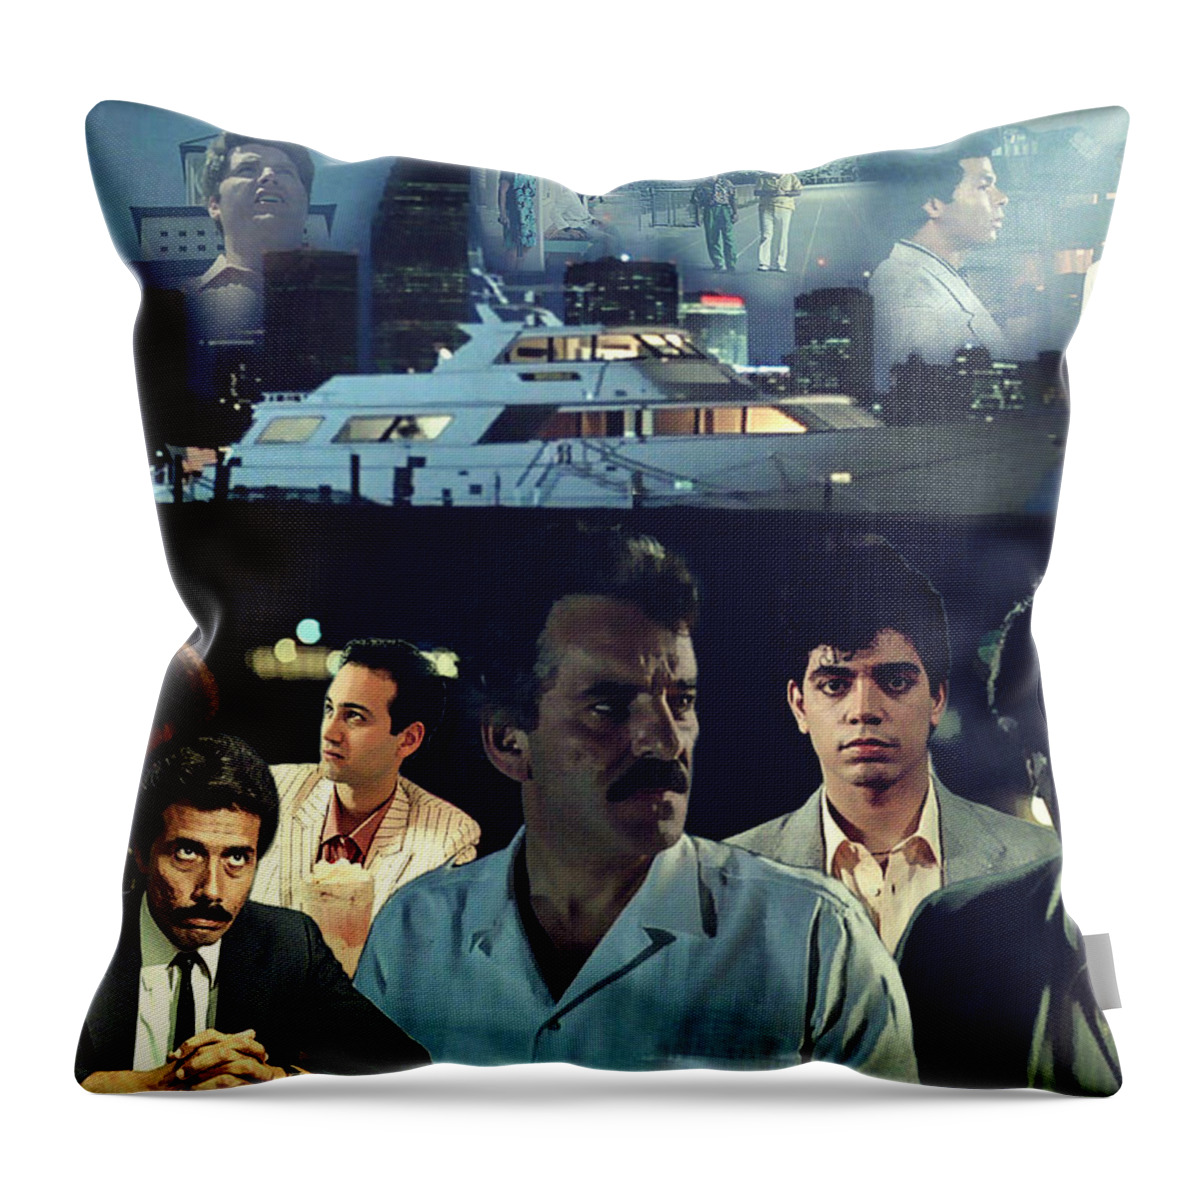 Miami Vice Throw Pillow featuring the digital art Lombard by Mark Baranowski